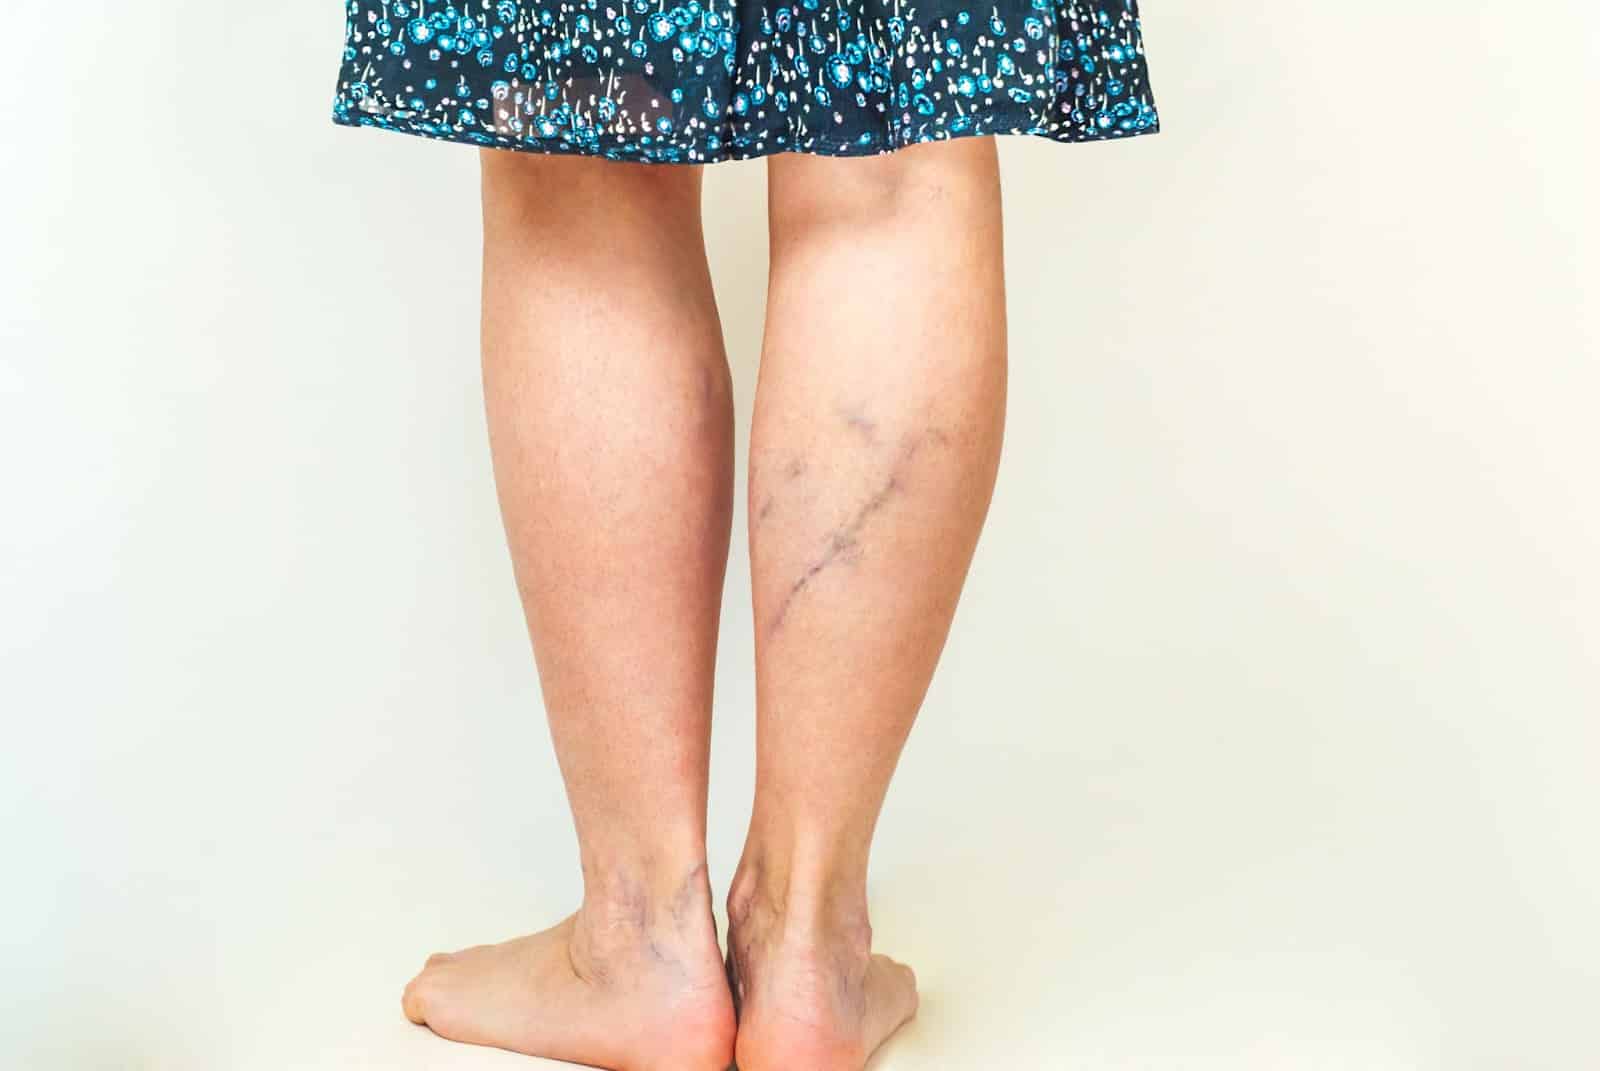 woman with varicose veins behind her legs